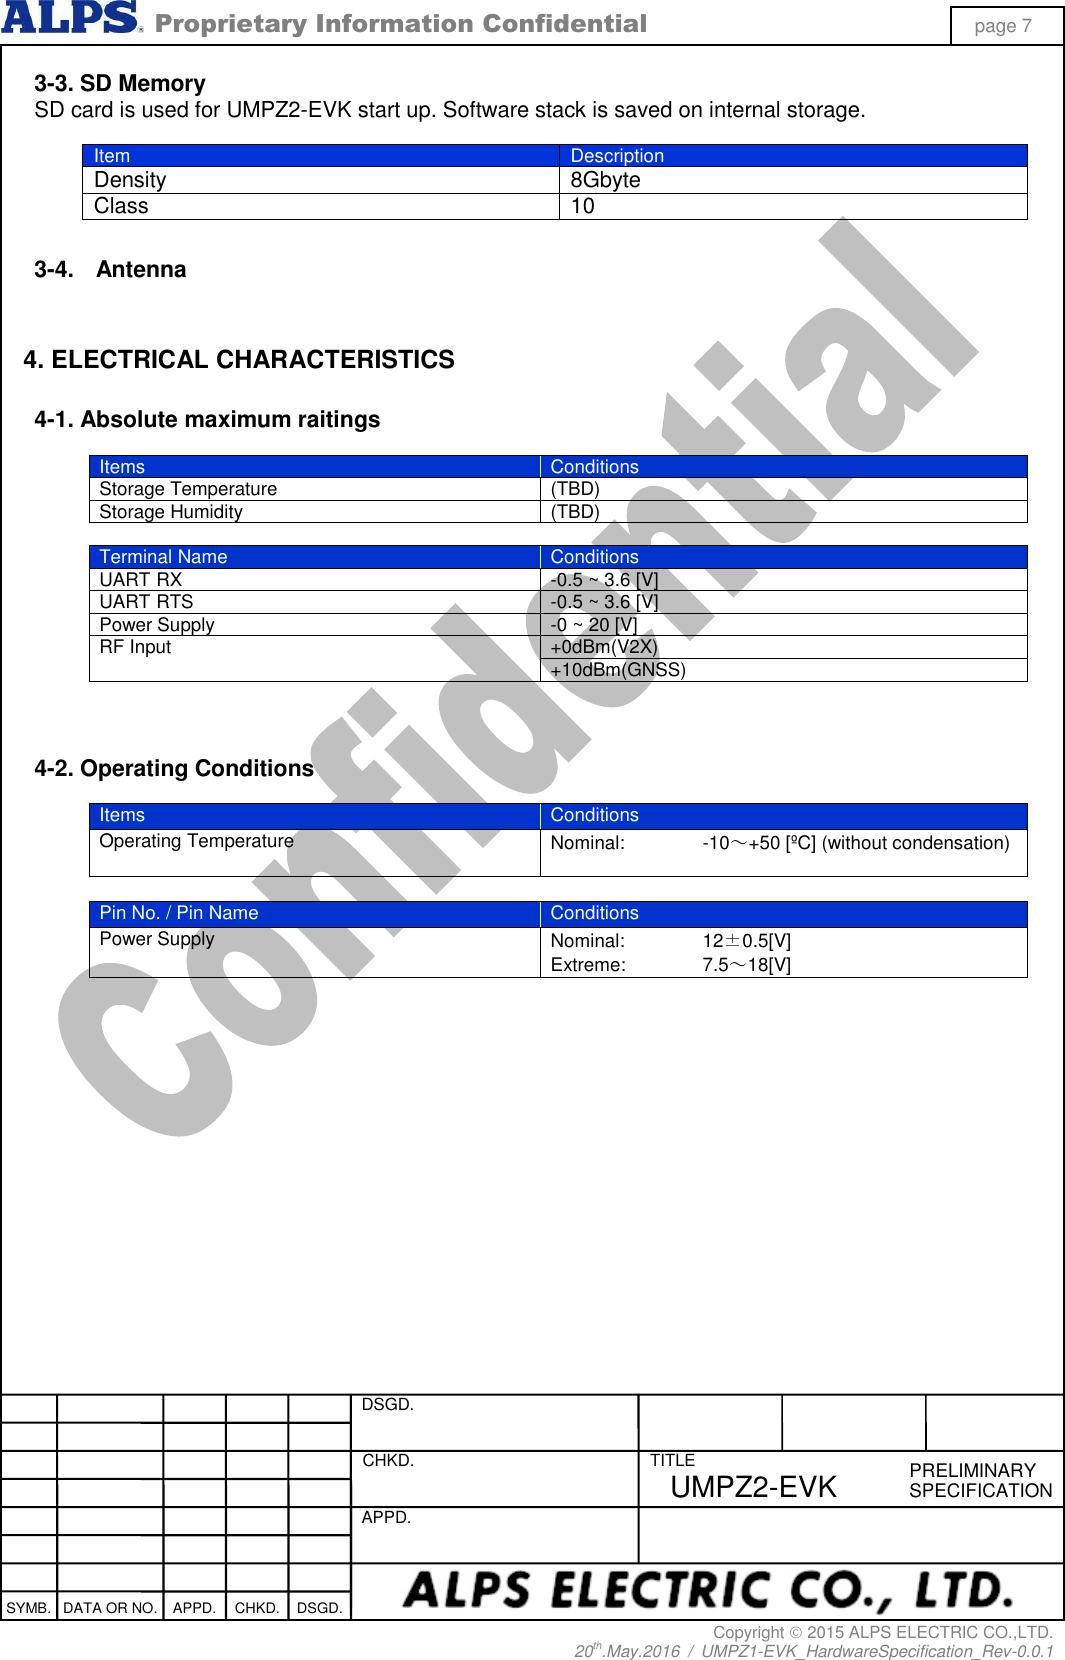  Proprietary Information Confidential page 7 Copyright  2015 ALPS ELECTRIC CO.,LTD. 20th.May.2016  /  UMPZ1-EVK_HardwareSpecification_Rev-0.0.1   DSGD.  CHKD.   APPD.  TITLE PRELIMINARY SPECIFICATION SYMB. DATA OR NO. APPD. CHKD. DSGD. UMPZ2-EVK 3-3. SD Memory SD card is used for UMPZ2-EVK start up. Software stack is saved on internal storage.  Item Description Density 8Gbyte Class 10  3-4.  Antenna   4. ELECTRICAL CHARACTERISTICS  4-1. Absolute maximum raitings  Items Conditions Storage Temperature (TBD) Storage Humidity (TBD)  Terminal Name Conditions UART RX -0.5 ~ 3.6 [V] UART RTS -0.5 ~ 3.6 [V] Power Supply -0 ~ 20 [V] RF Input +0dBm(V2X) +10dBm(GNSS)    4-2. Operating Conditions  Items Conditions Operating Temperature Nominal:  -10～+50 [ºC] (without condensation)   Pin No. / Pin Name Conditions Power Supply Nominal:  12±0.5[V] Extreme:  7.5～18[V]  